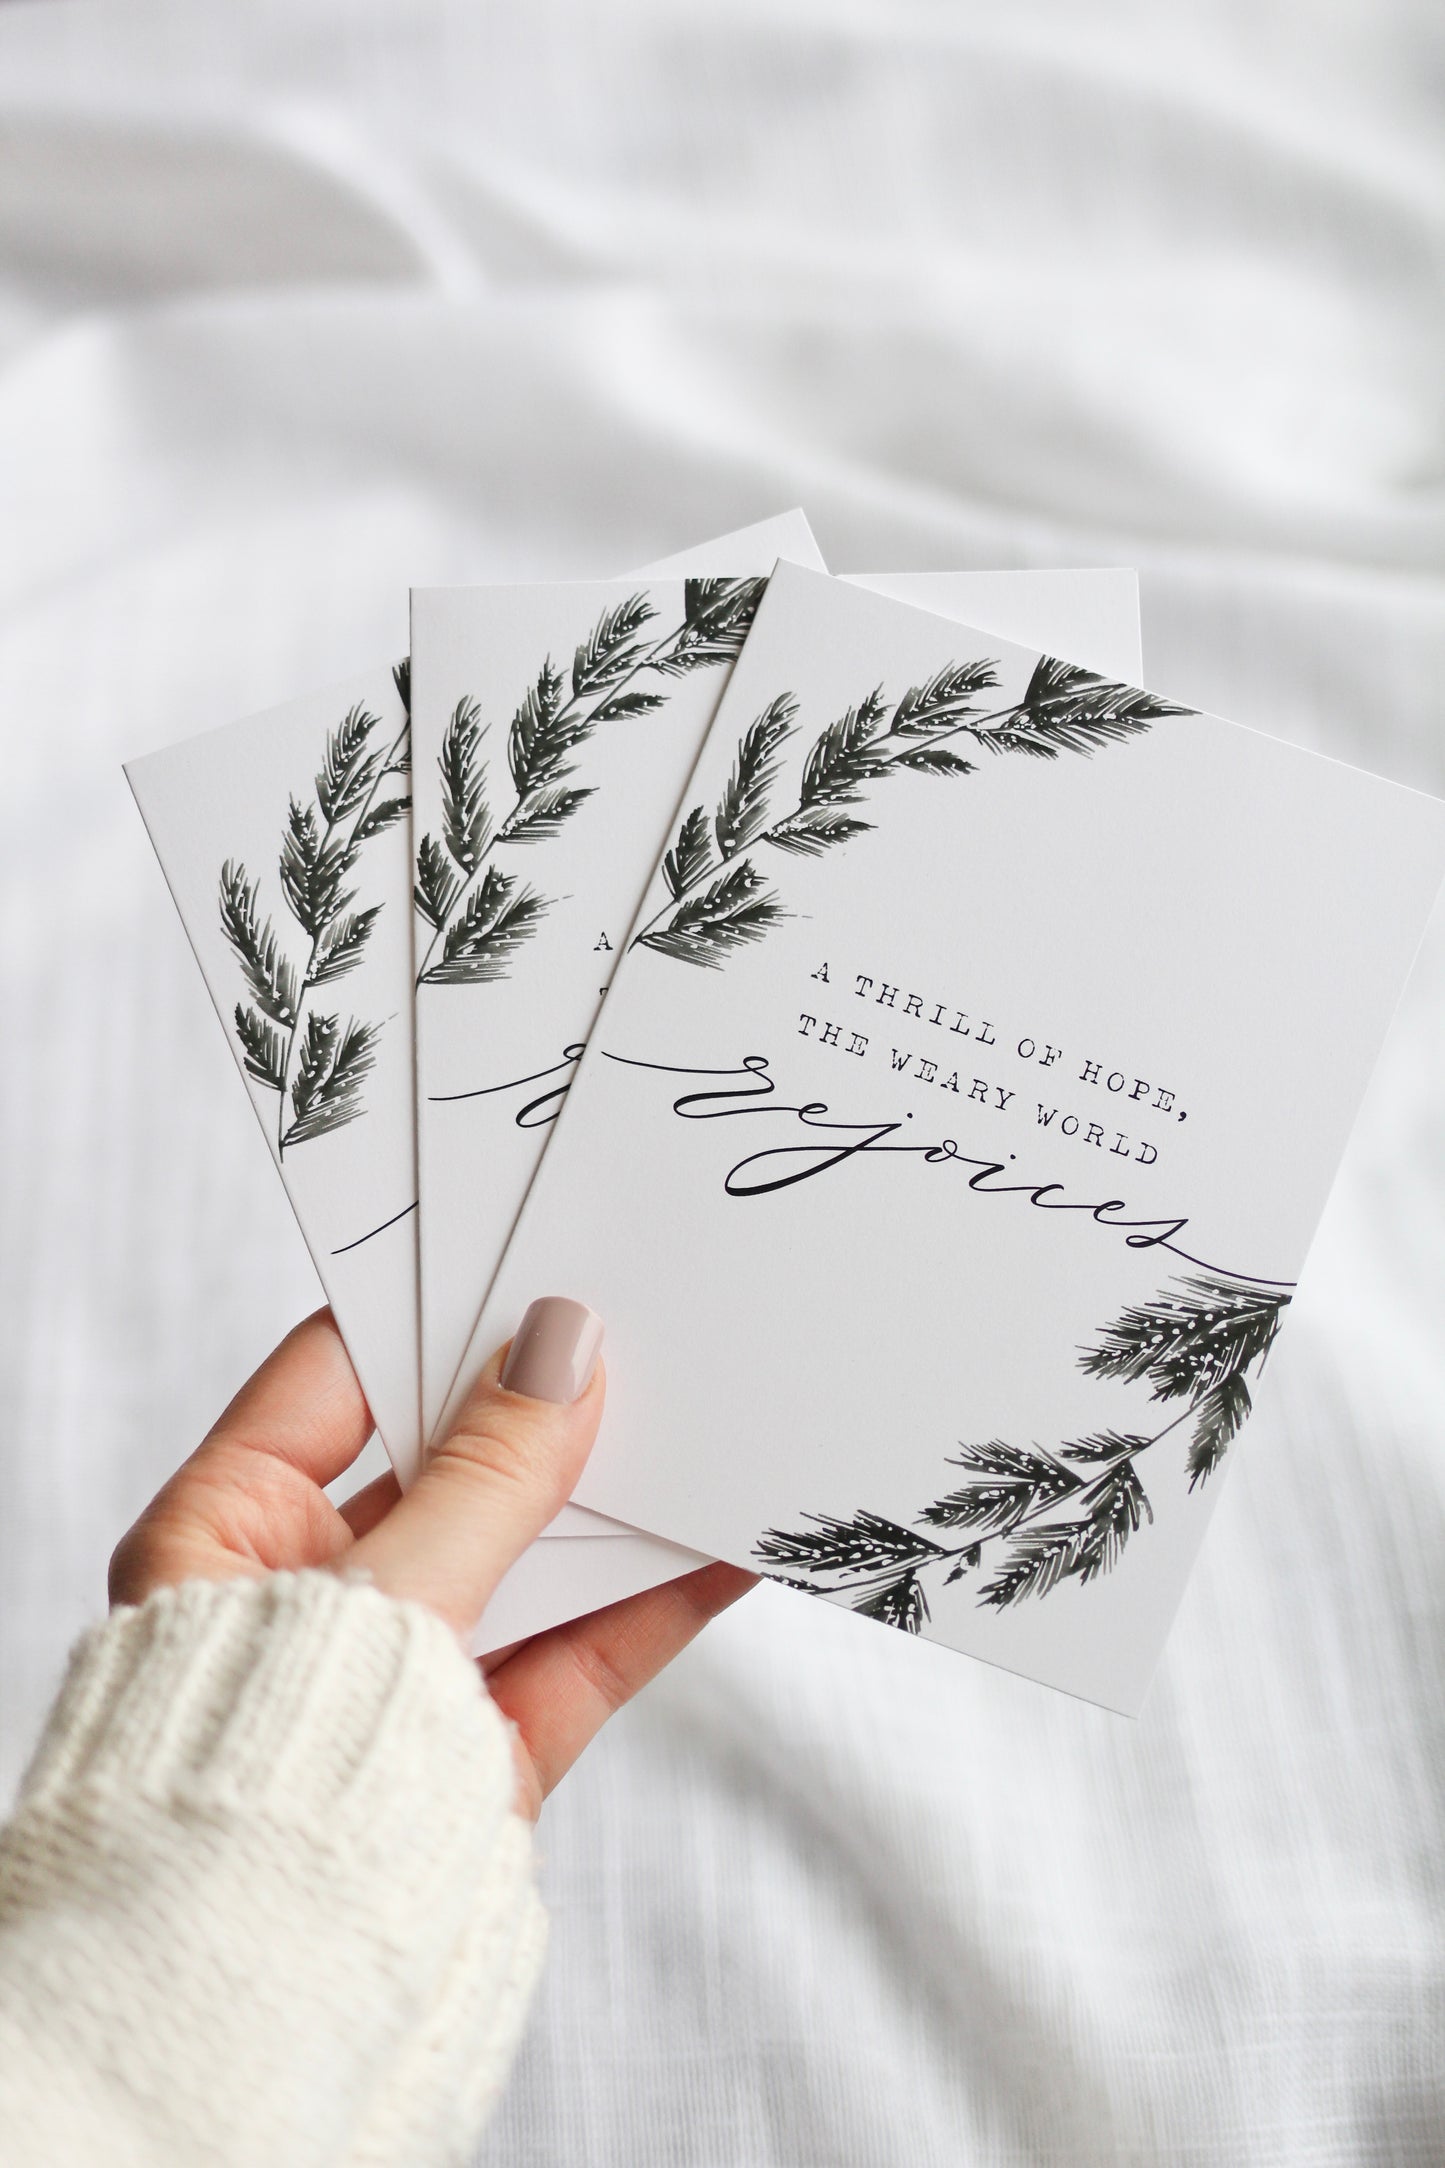 "a thrill of hope..."  |  Elegant Christmas Cards